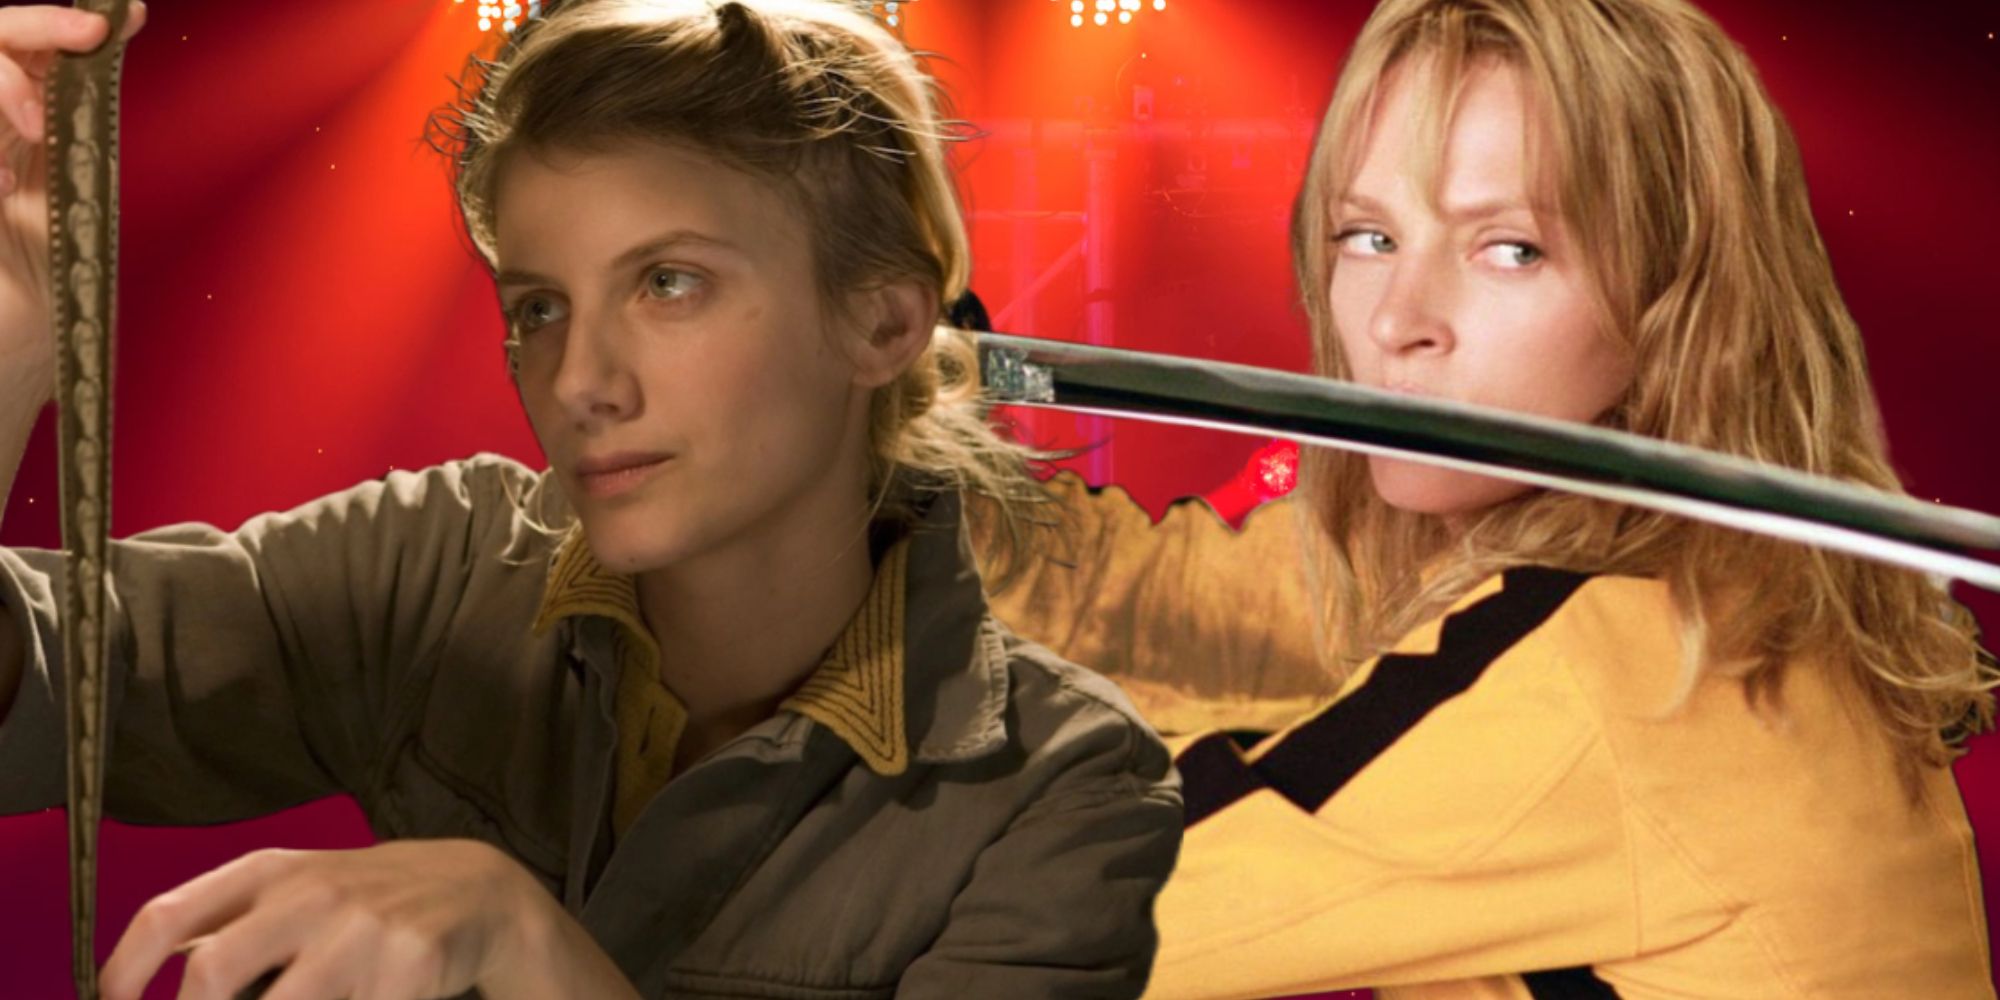 An image of Shonsanna and The Bride in Kill Bill